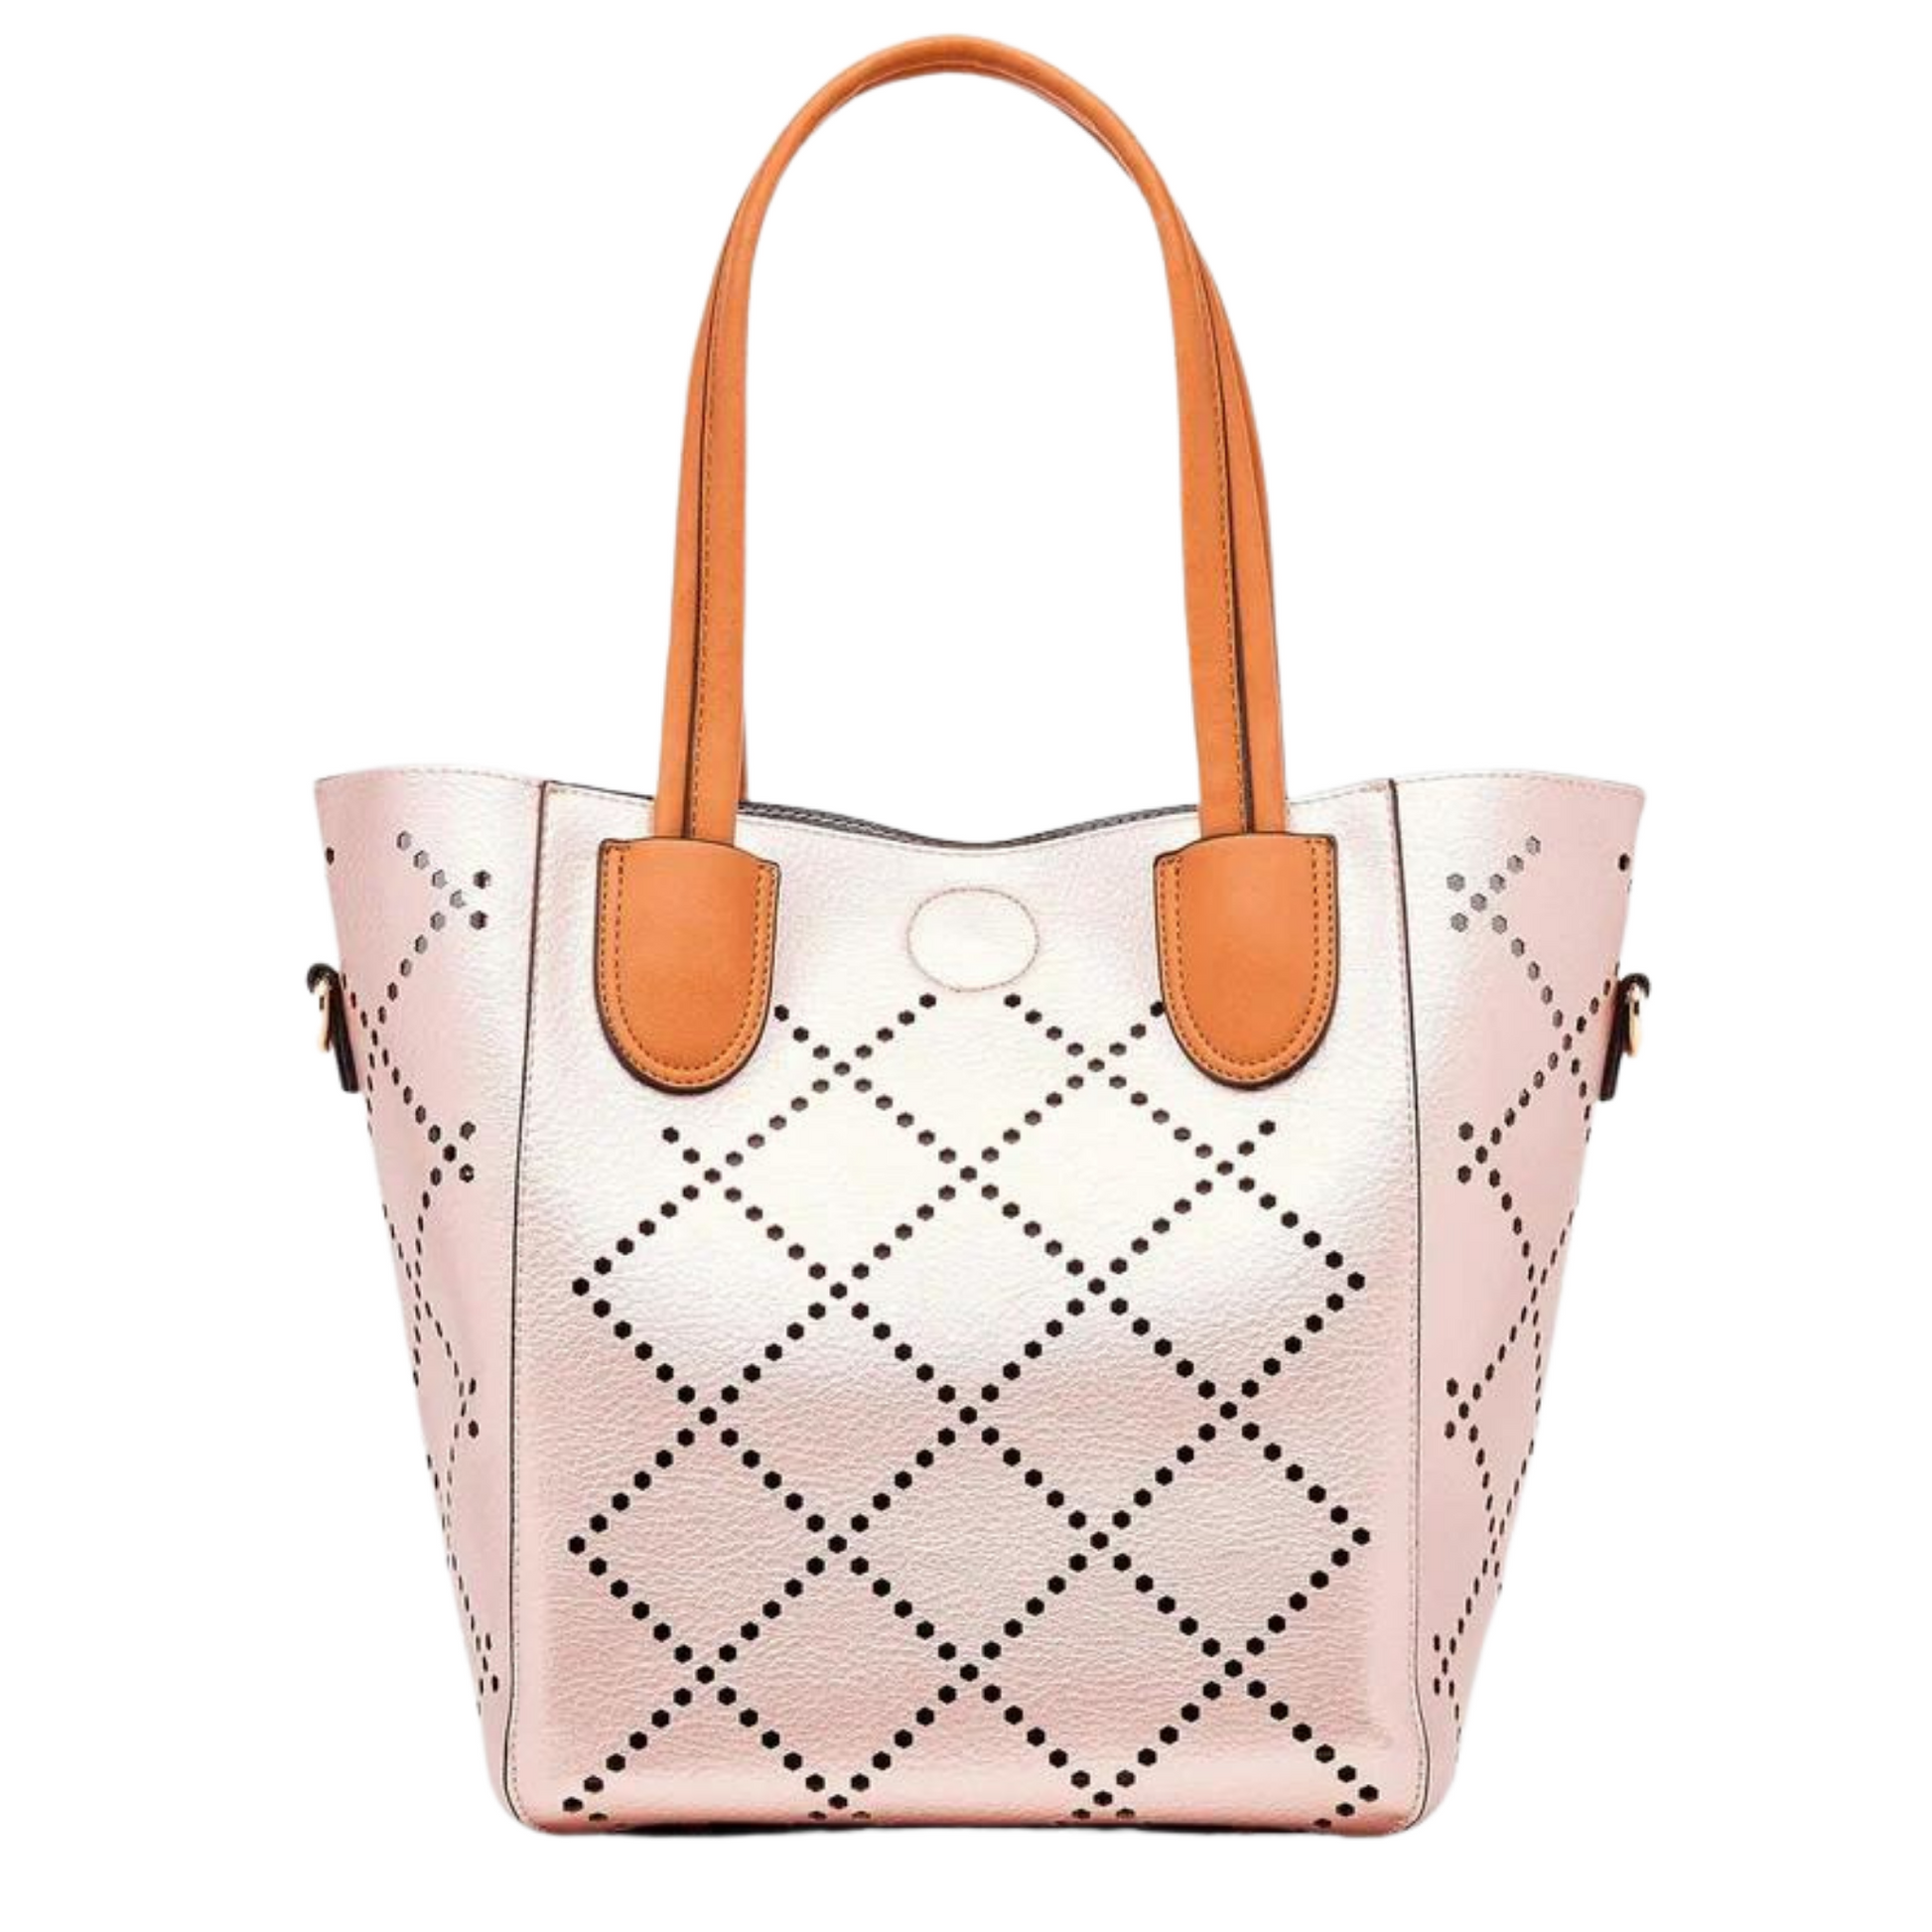 A front view of the Chanpagne Pink bag showing the leather straps and the unique detailing.